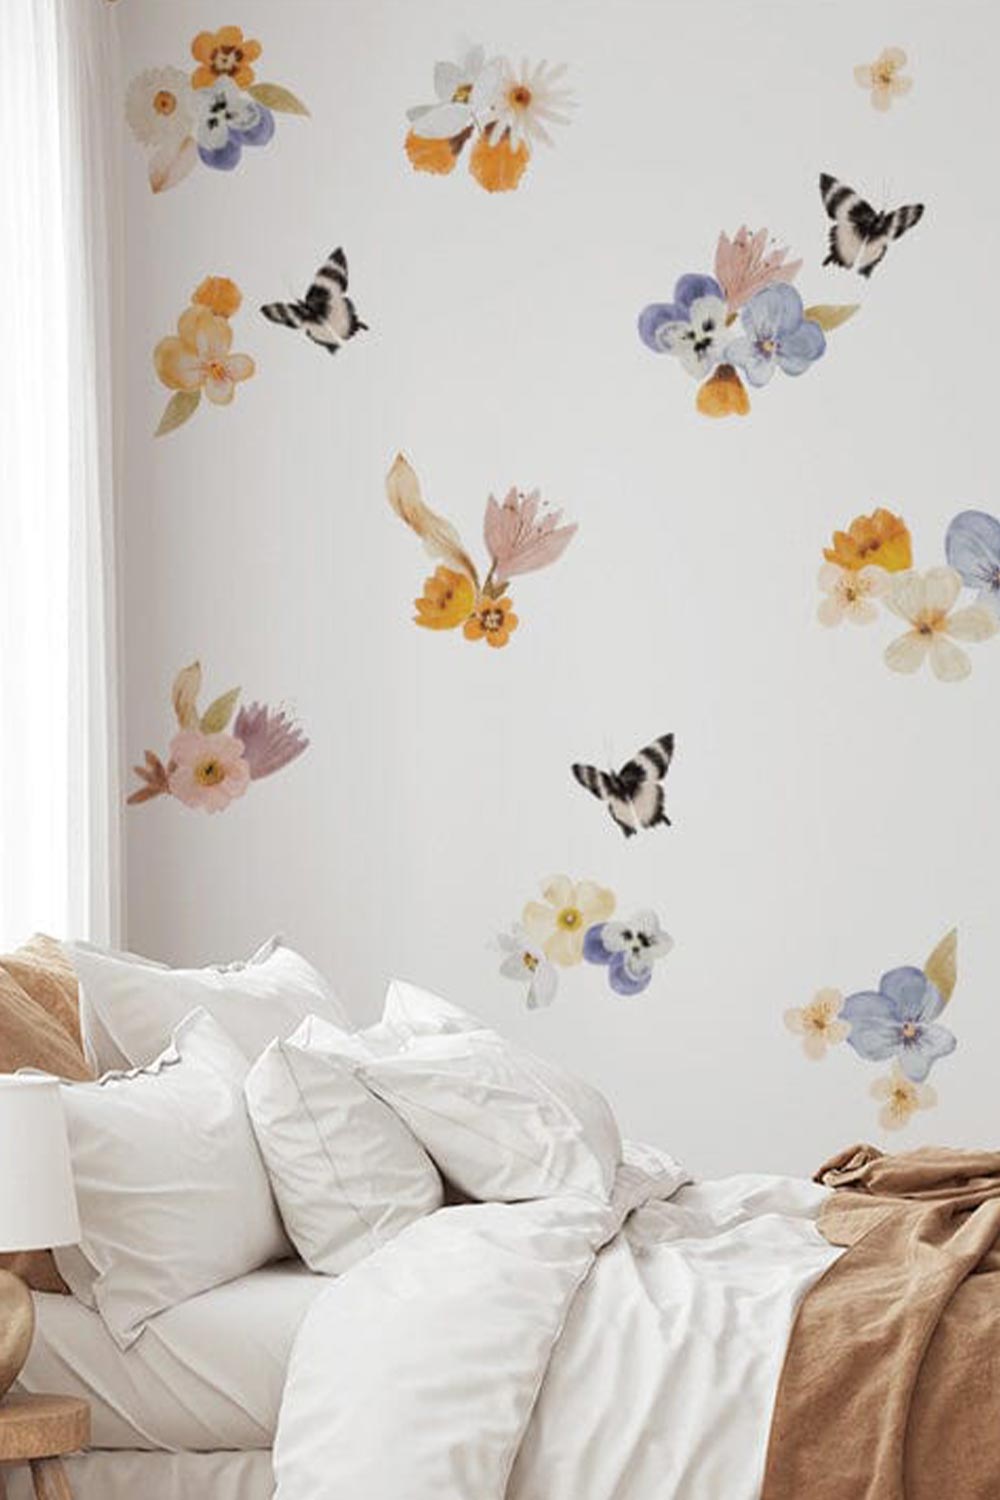 Mini Spring Time Floral Wall Decals featured on twins walls. Florals and butterflies shown on a white wall.